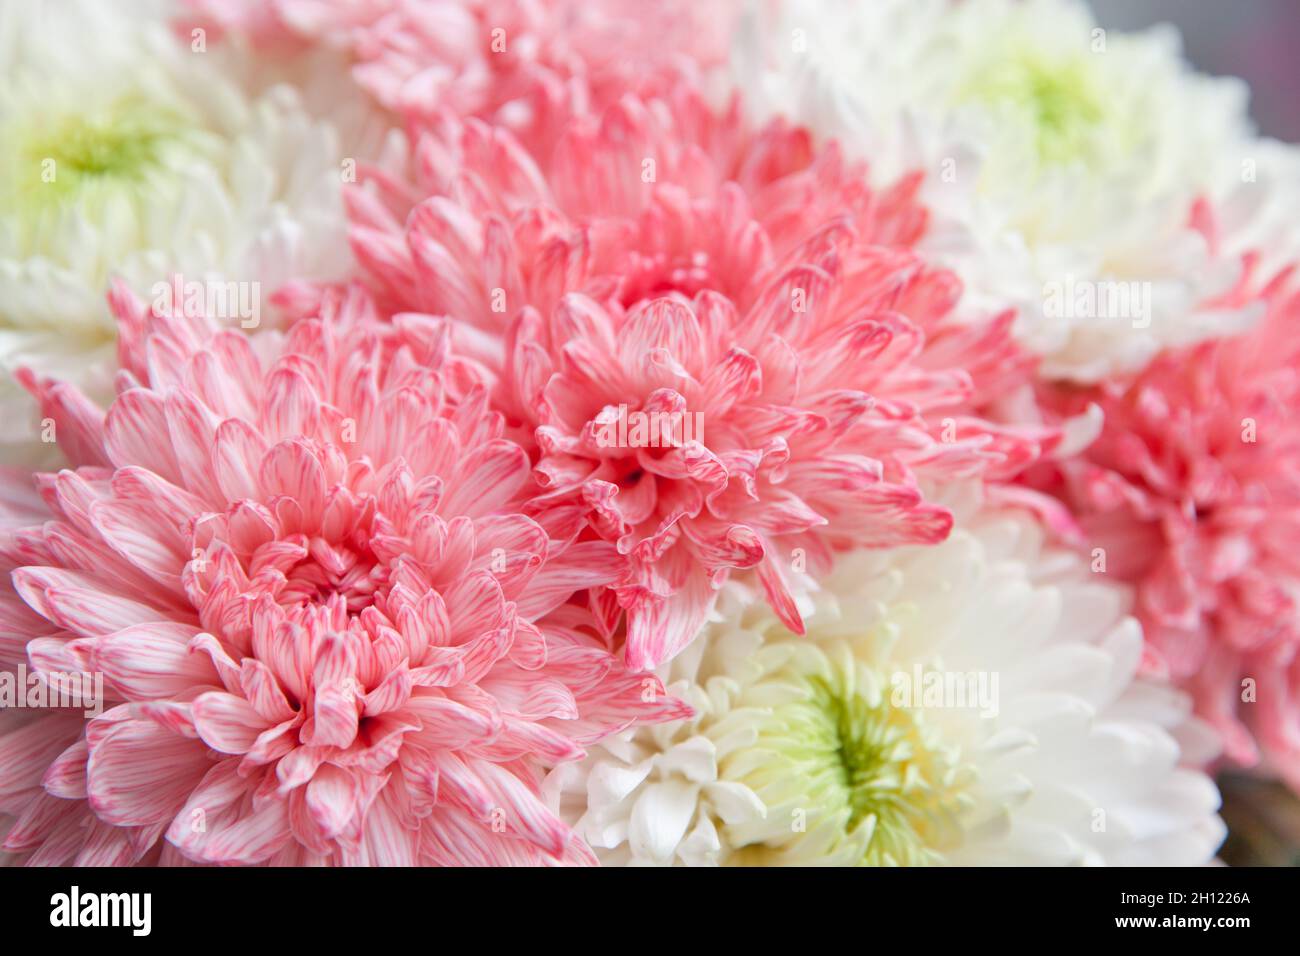 Pink peony close-up. Beautiful flower with many petals. Floral background. Stock Photo